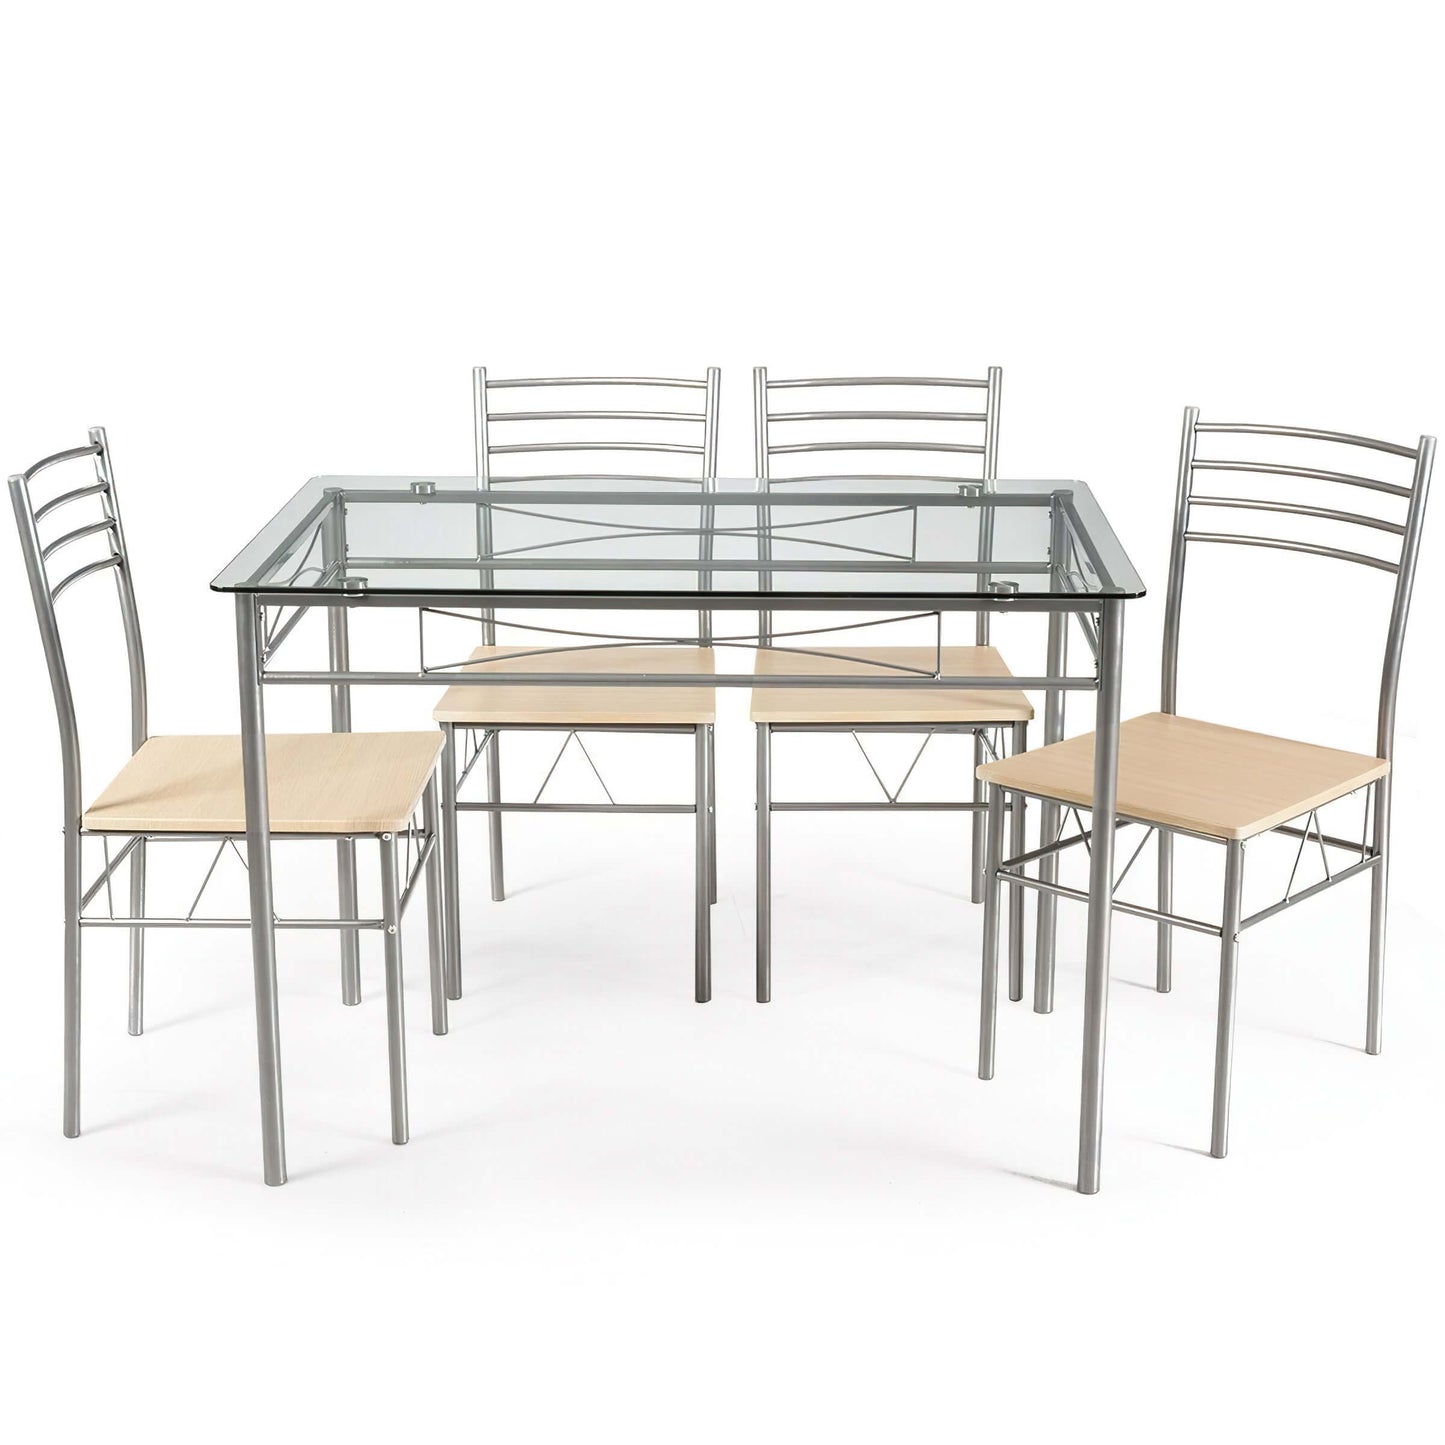 Trendy WETA 5 Piece Dining Set Table and 4 Chairs Glass Top Kitchen Breakfast Furniture